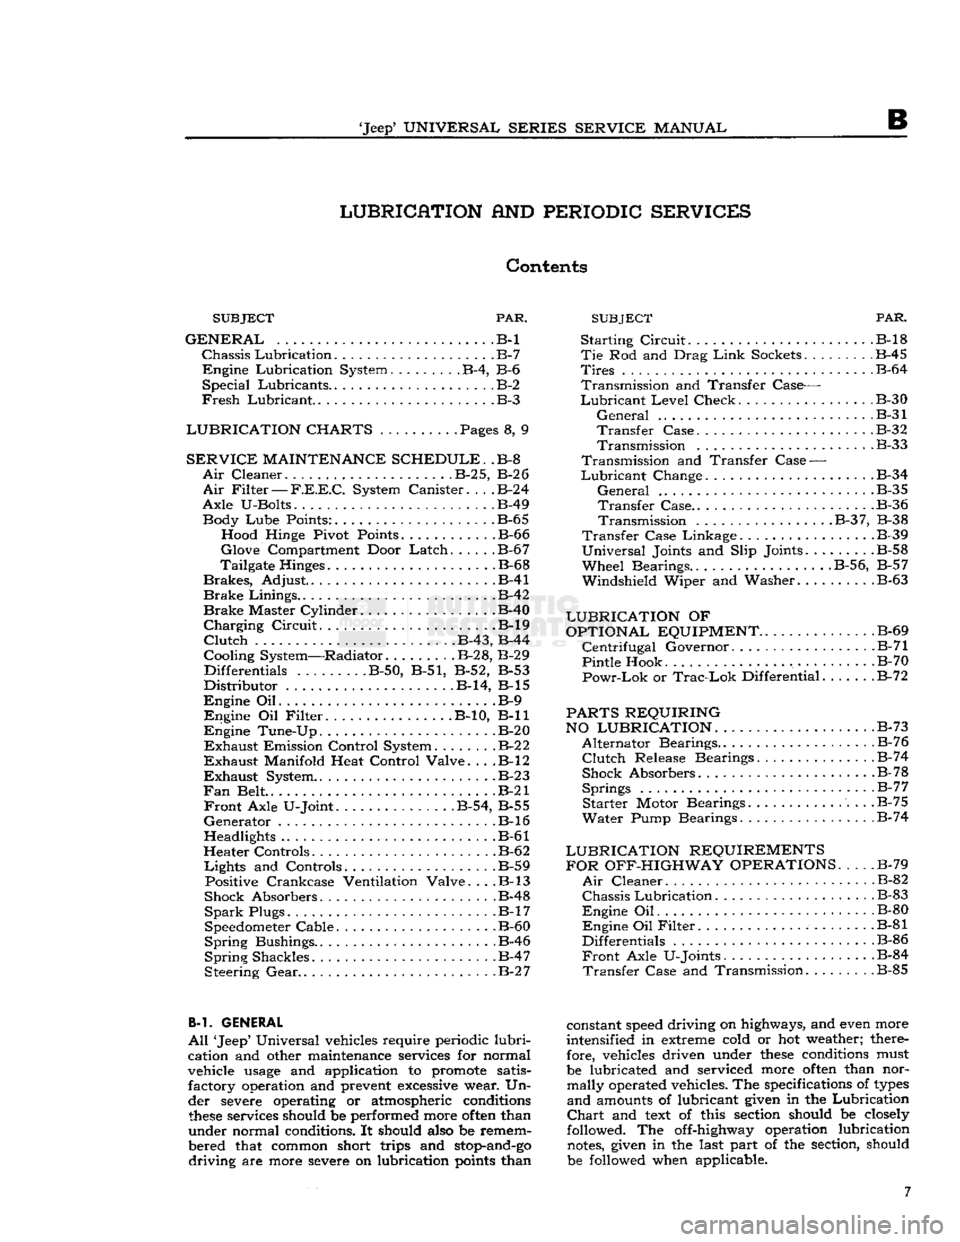 JEEP DJ 1953  Service Manual 
Jeep*
 UNIVERSAL SERIES
 SERVICE
 MANUAL 

B 
LUBRICATION
 AND
 PERIODIC SERVICES 

Contents 
 PAR. SUBJECT
 PAR. 
SUBJECT 

GENERAL
 .B-l 
 Chassis
 Lubrication
 B-7 
Engine
 Lubrication System B-4